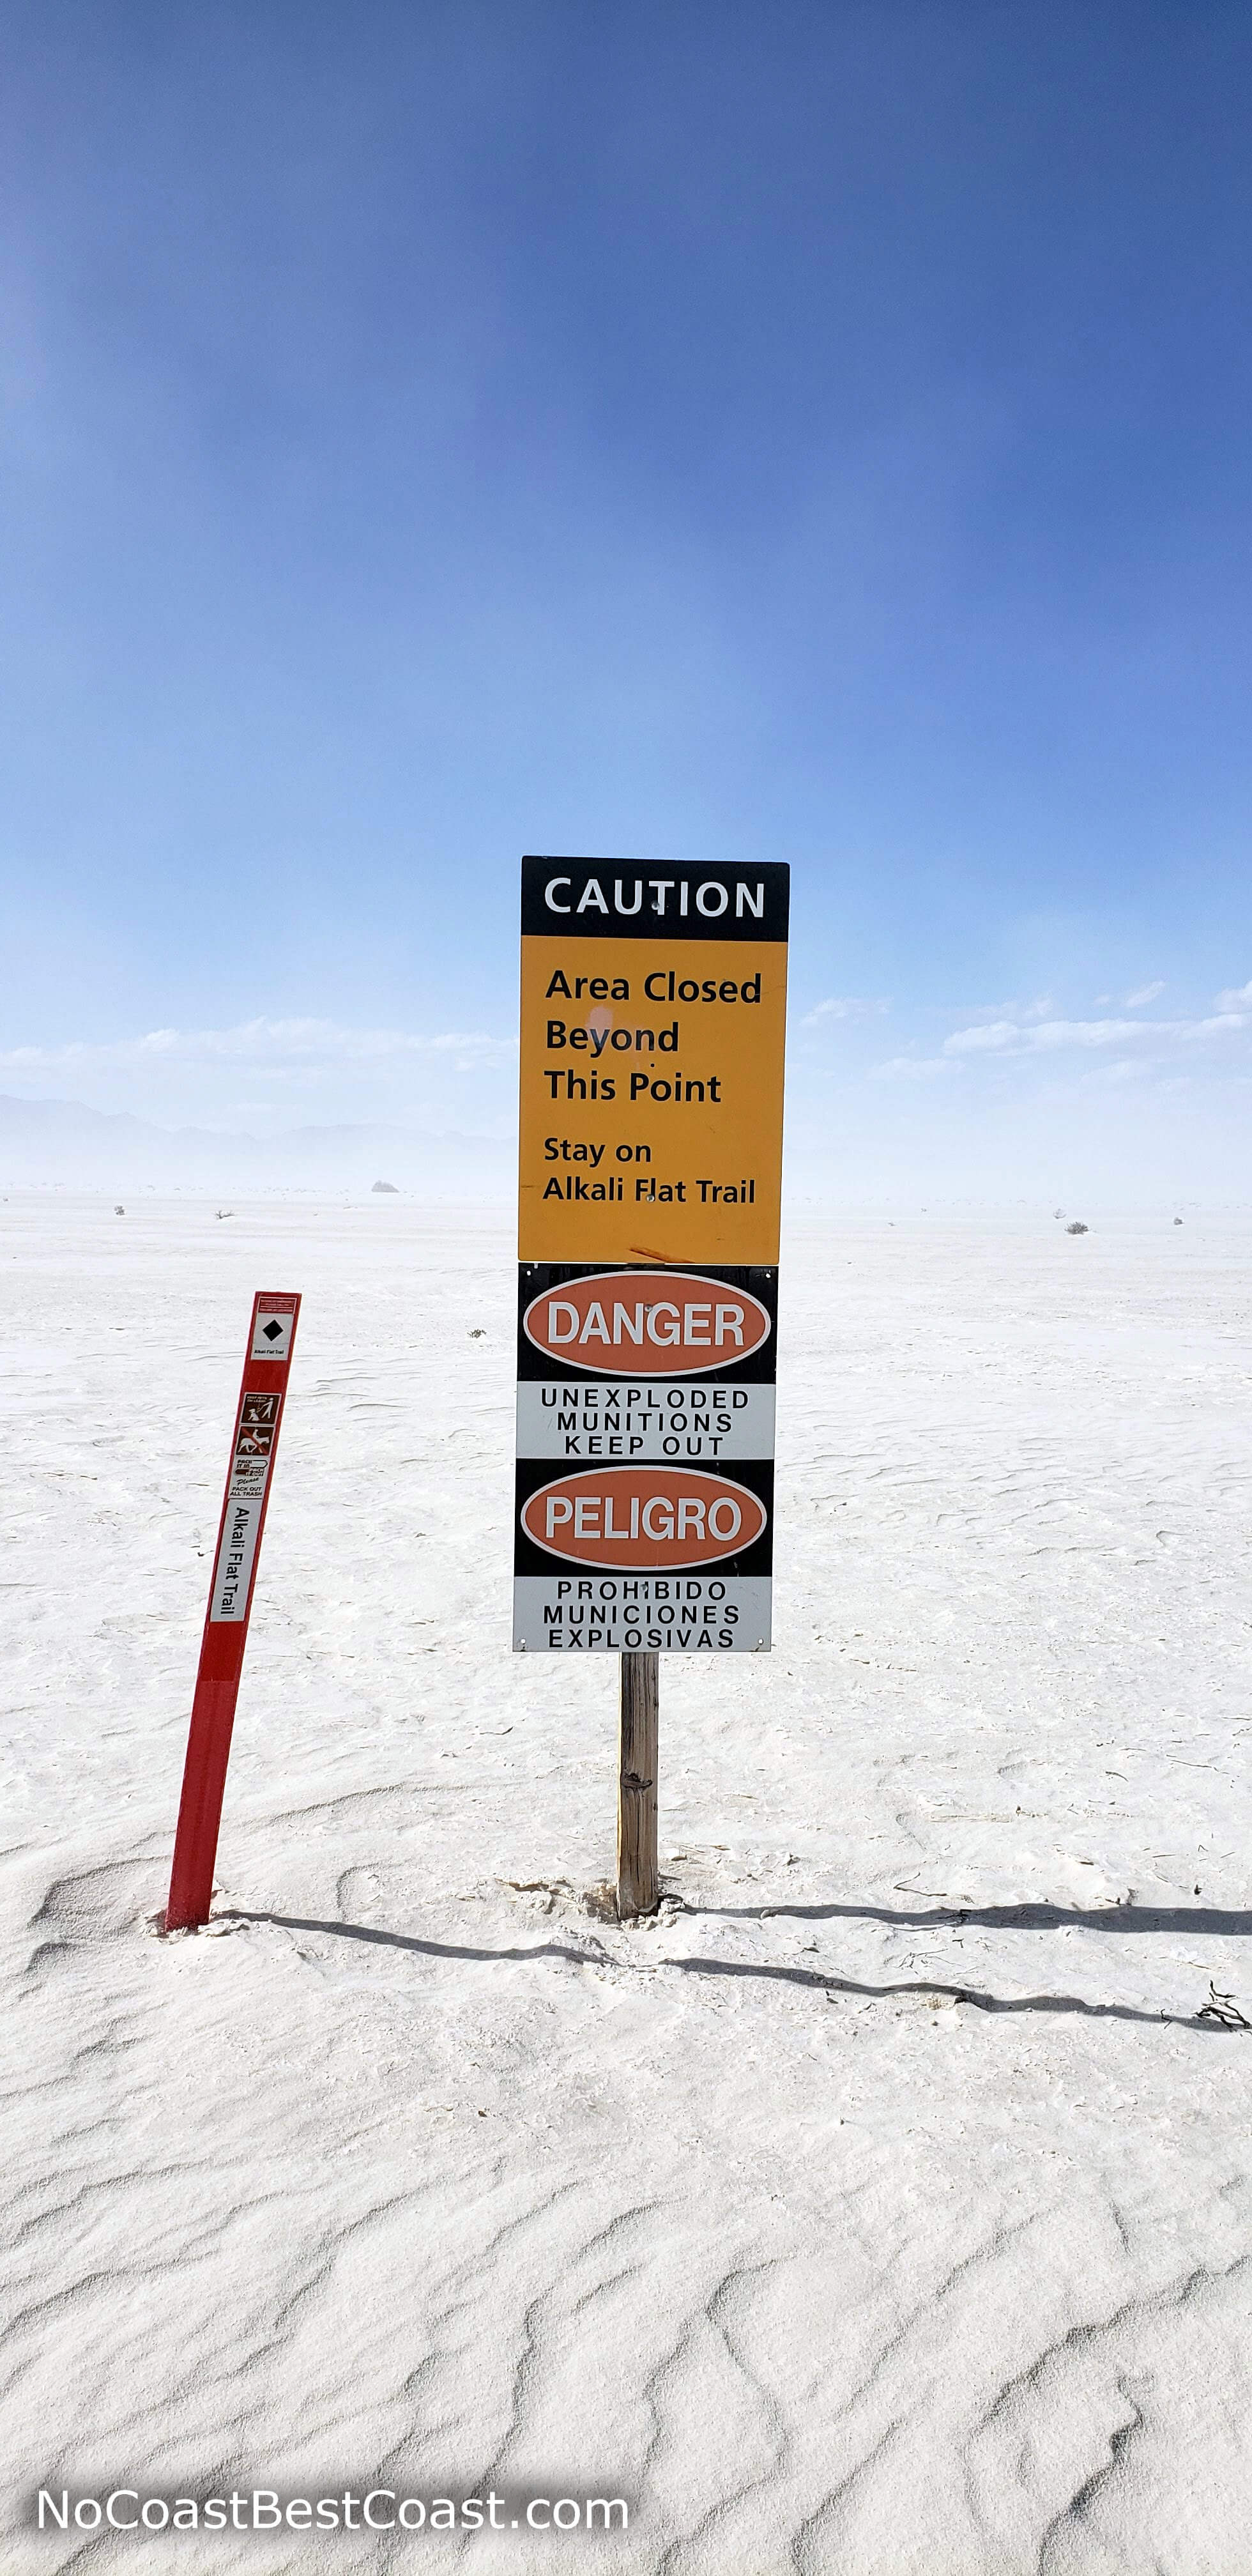 The warning sign at the edge of the White Sands Missile Range